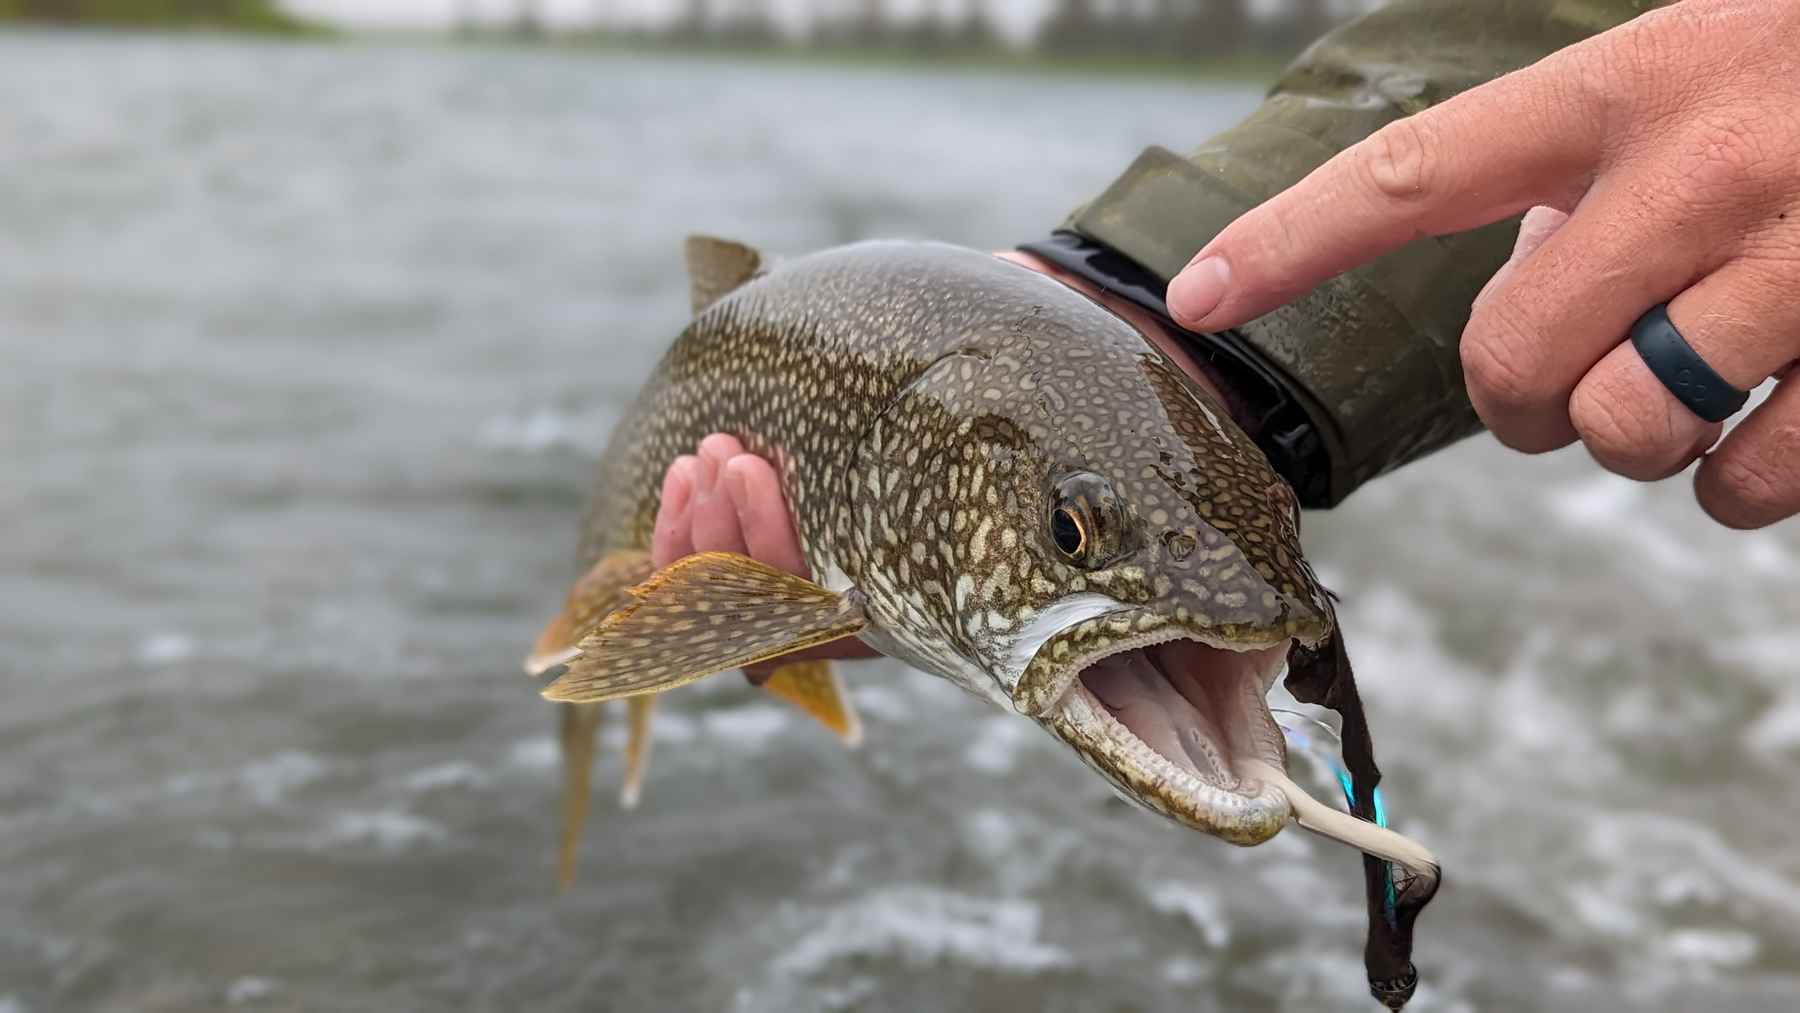 How To Fly Fish - Learn From a Friend - Fish Alaska Magazine